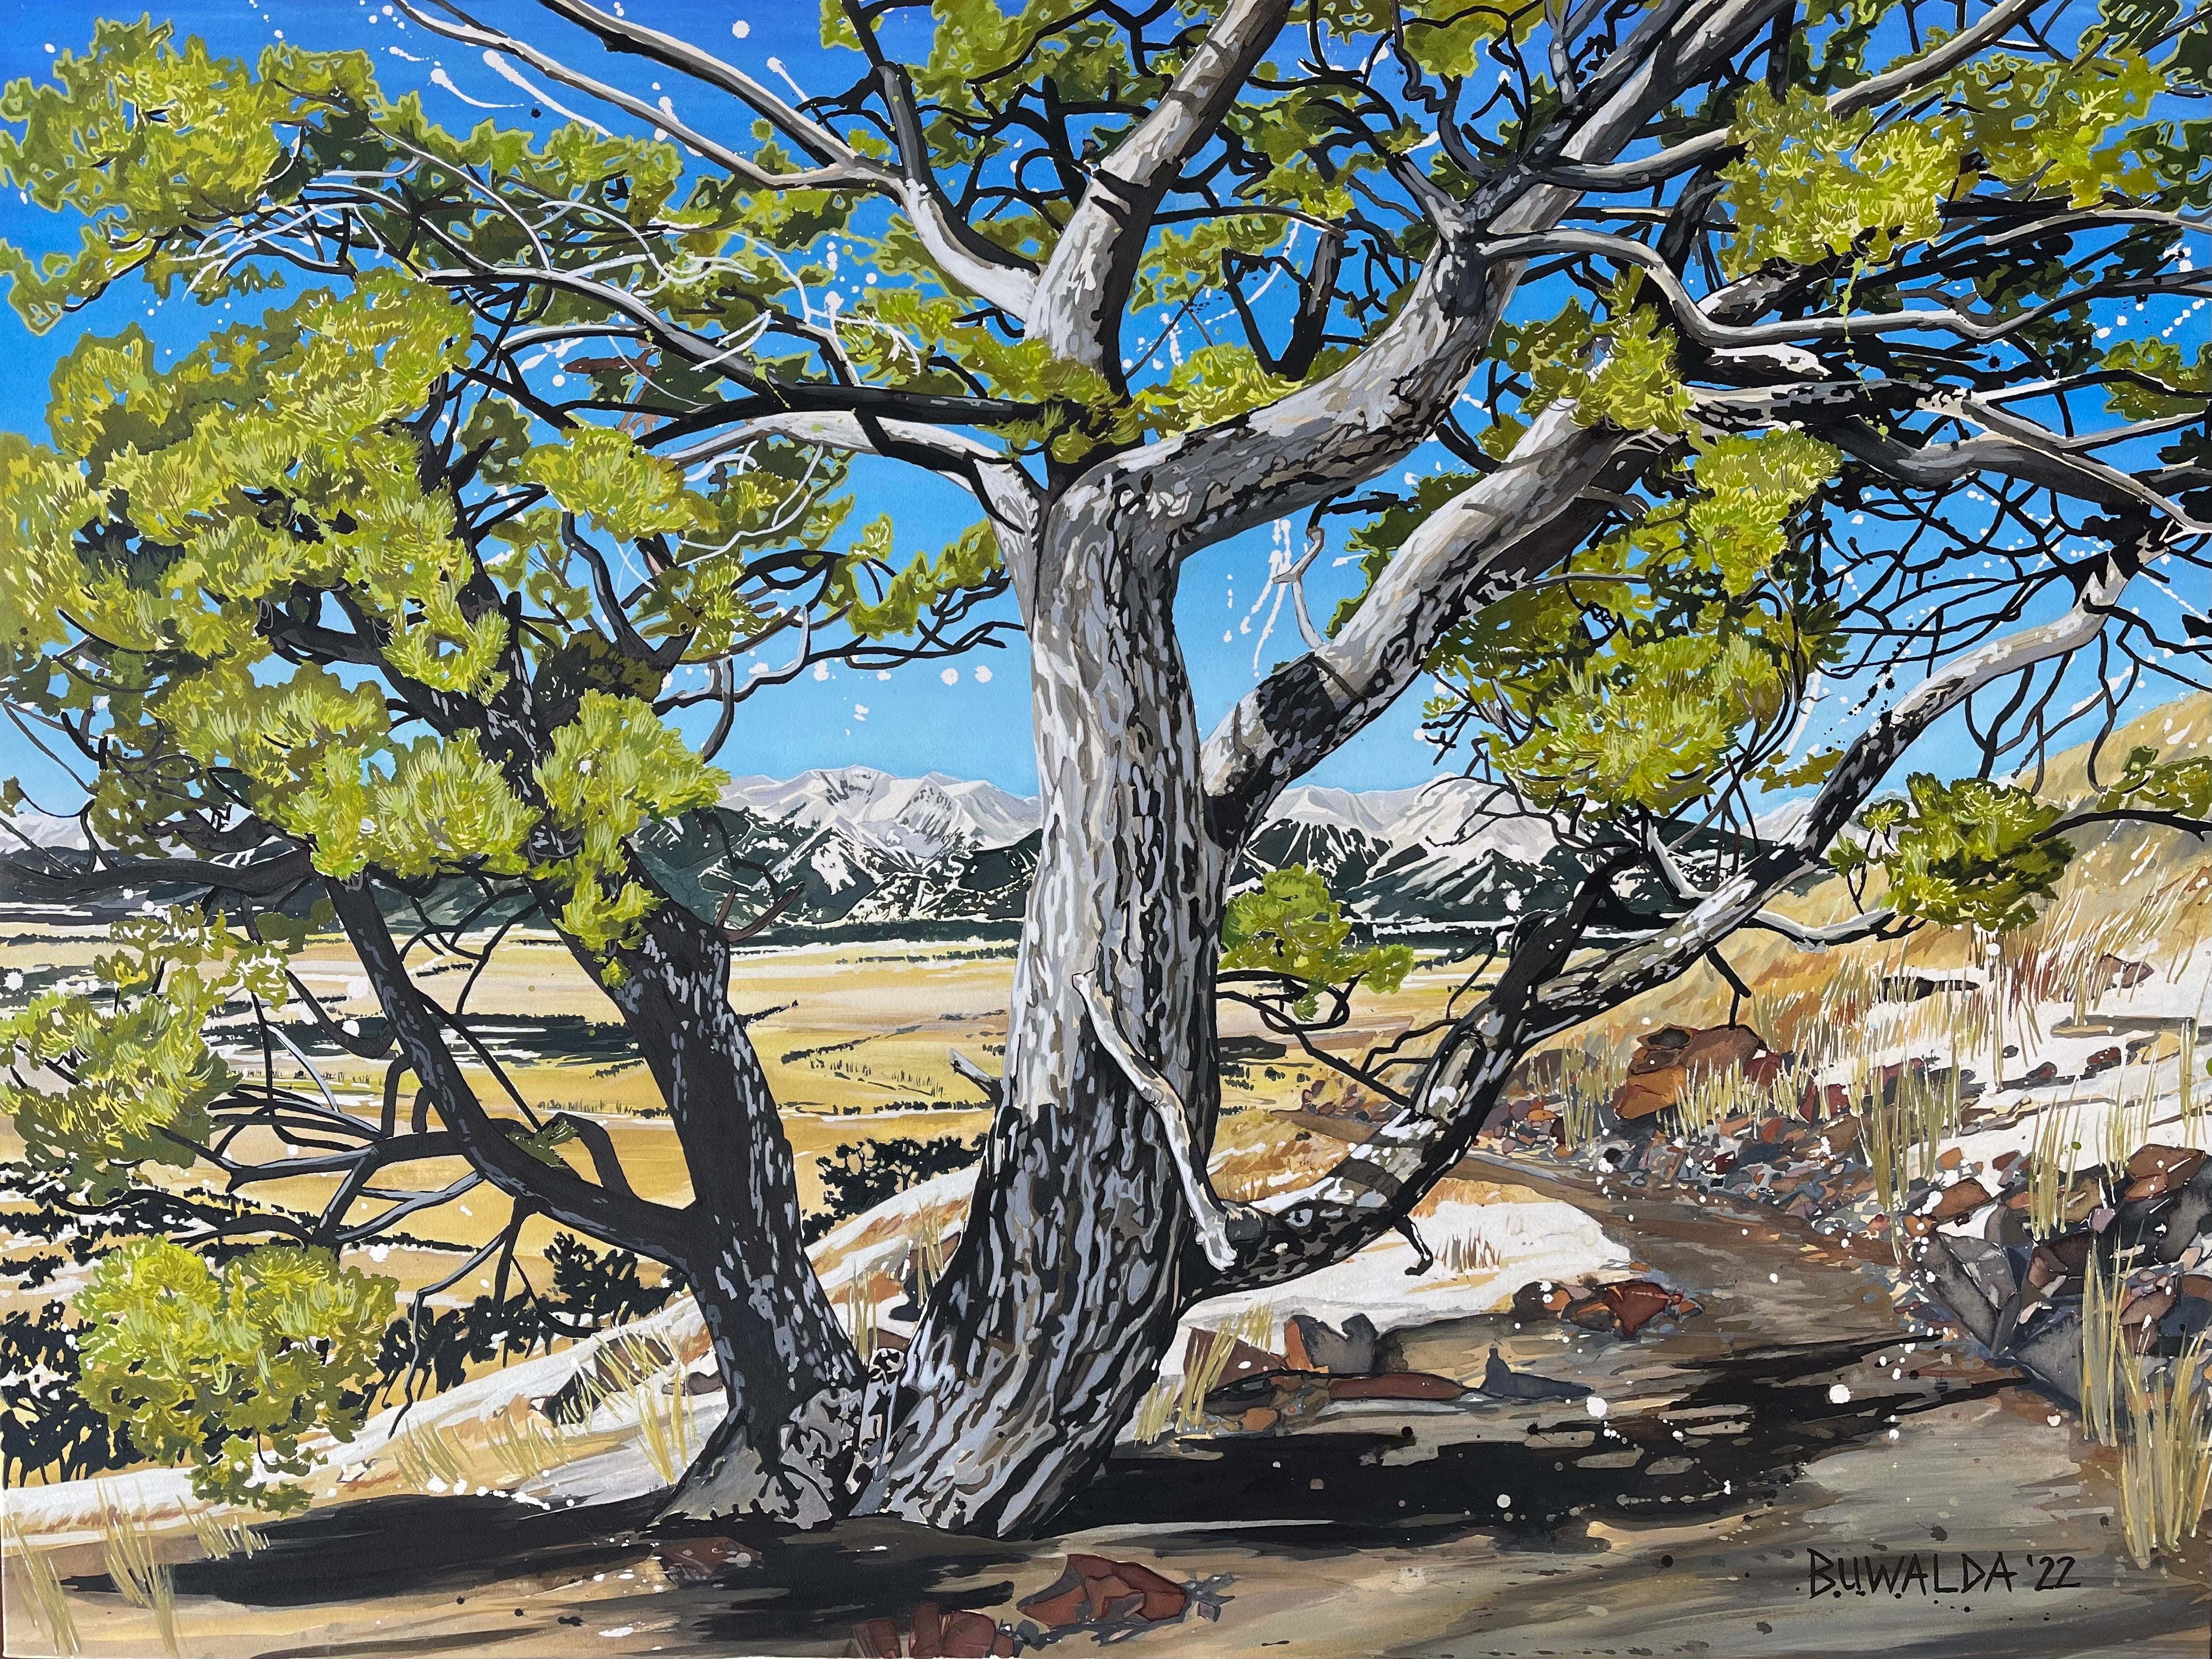 Original Painting Acrylic Ink on Stretched Watercolor Paper "Pinyon", 40"x30", 'Shelter-Wood' Series 2022 $4,000 SOLD